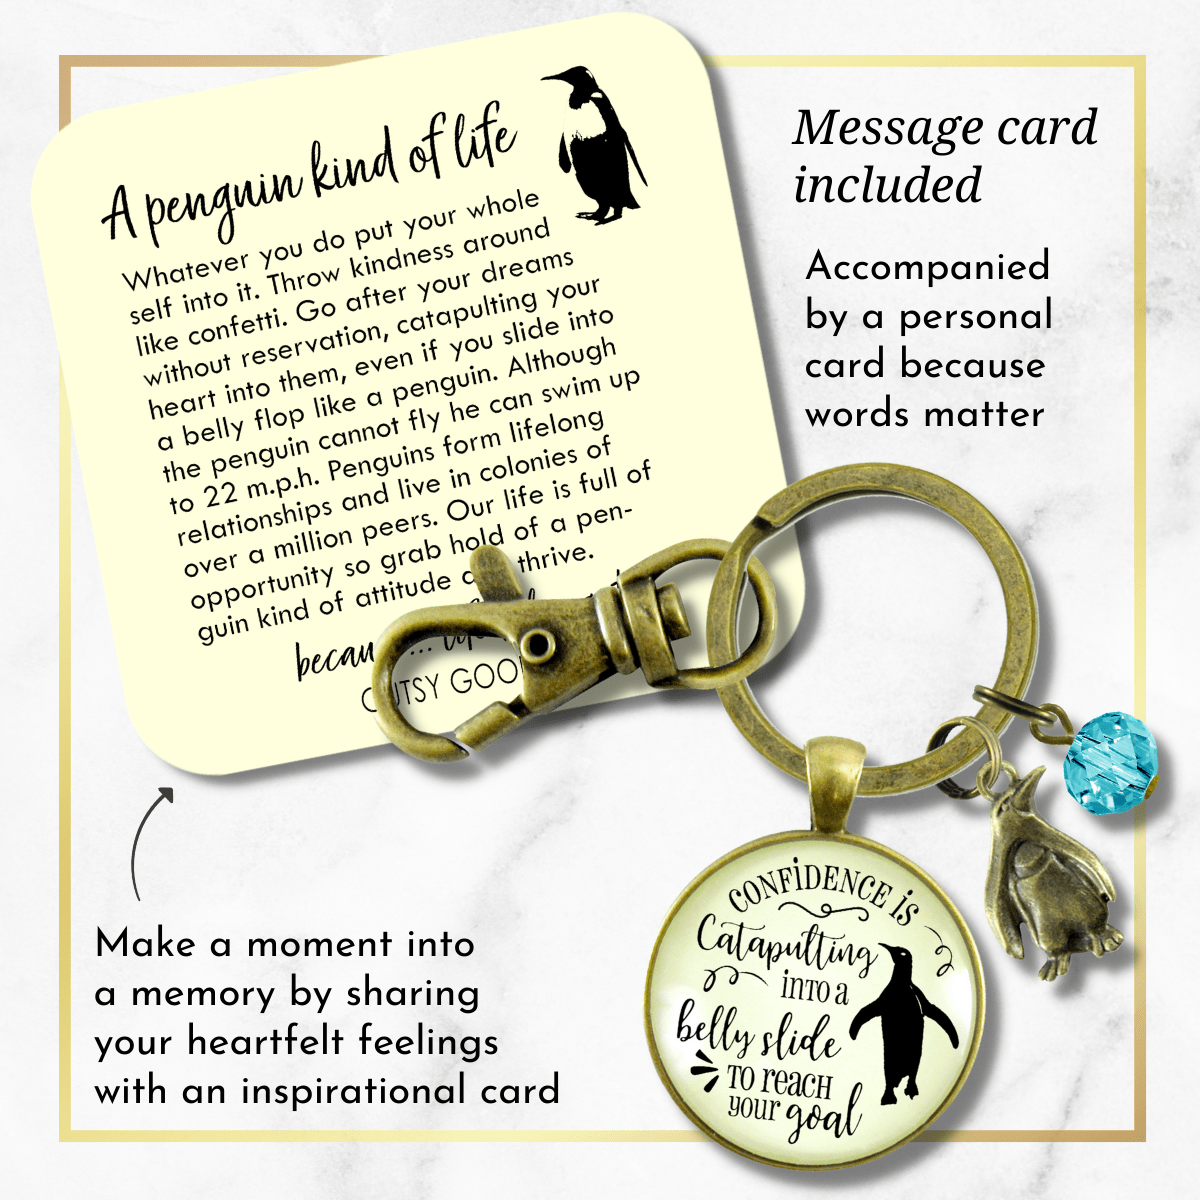 Penguin Keychain Confidence Is Catapulting Into A Belly Slide Jewelry Gift - Gutsy Goodness